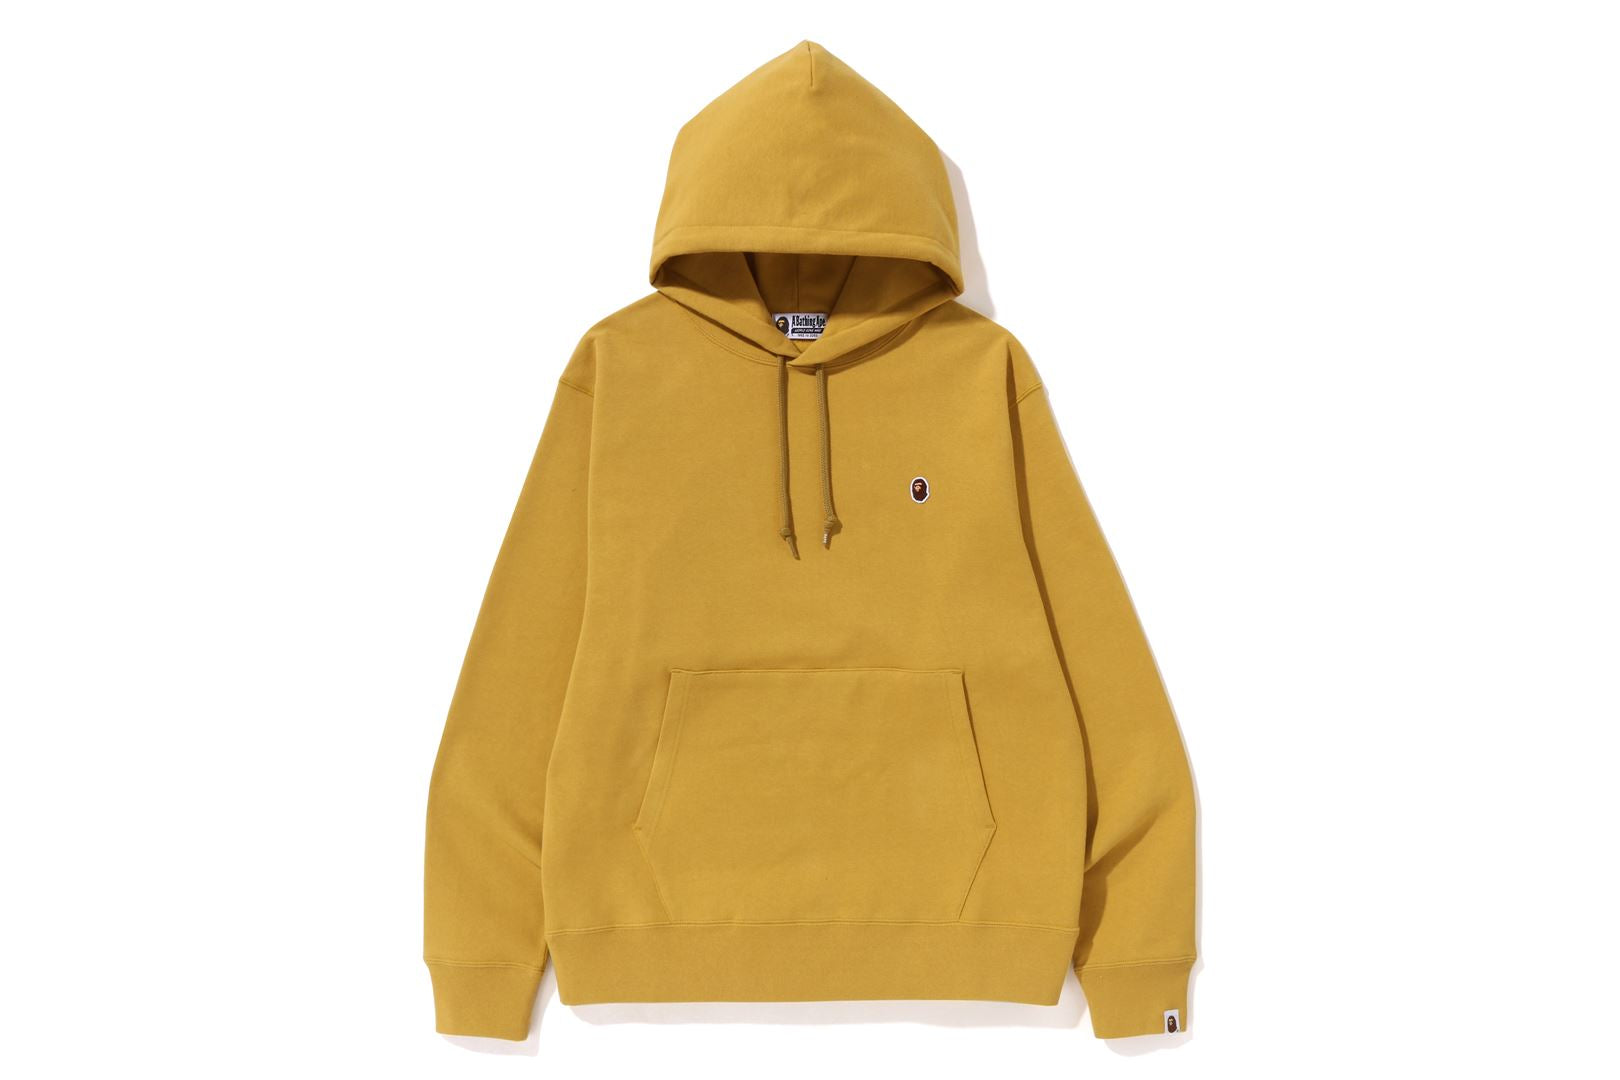 APE HEAD ONE POINT RELAXED FIT PULLOVER HOODIE | bape.com